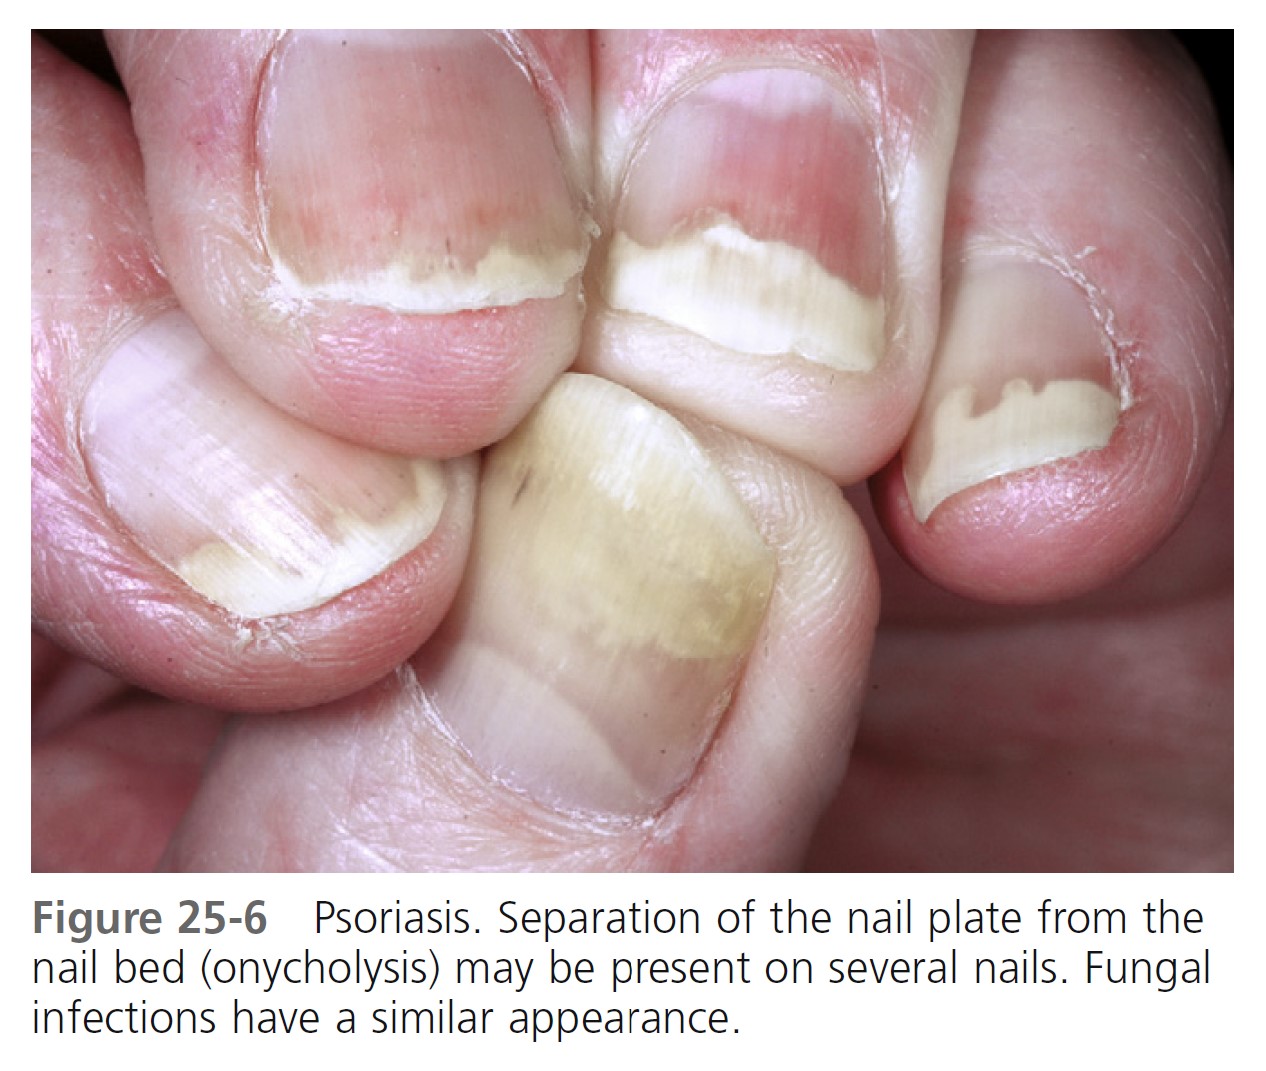 What's New in Nail Anatomy? Pterygium: What and Where is It? - Schoon  Scientific